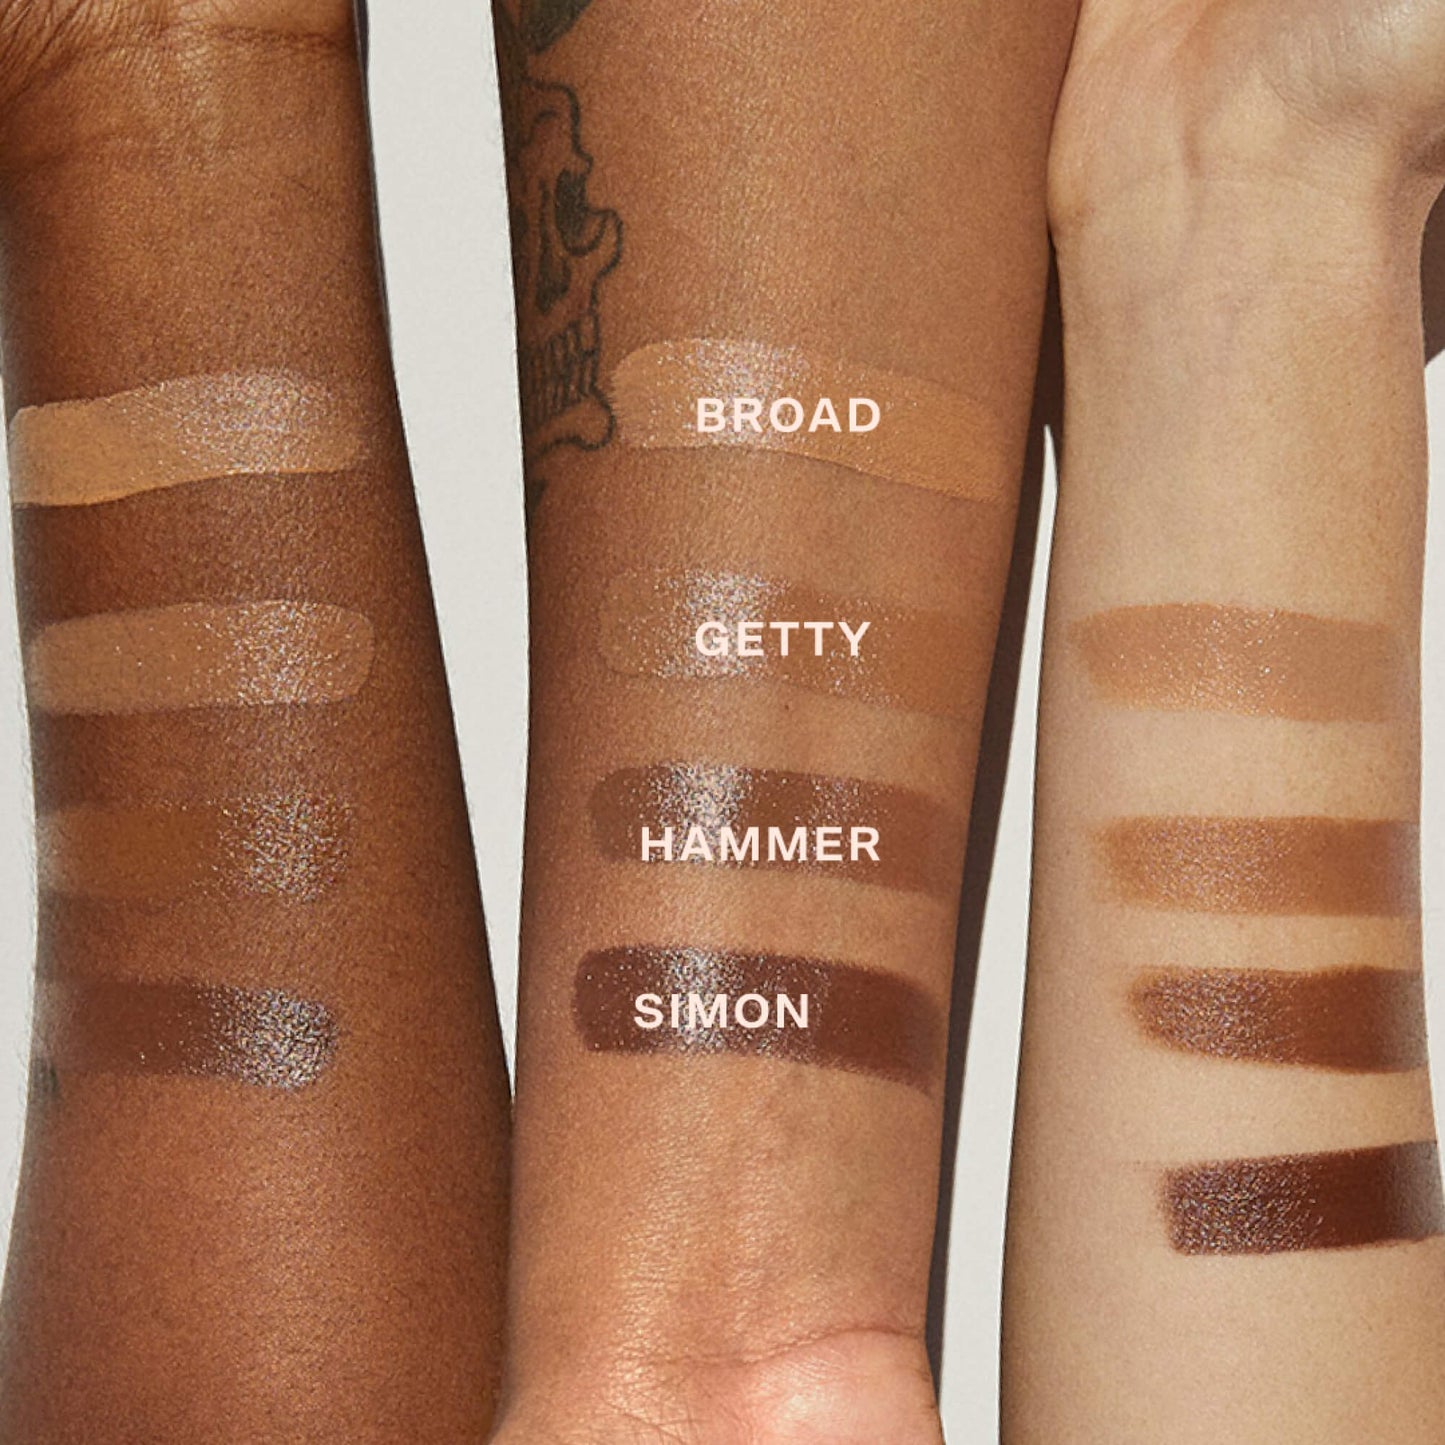 [Shared: All four shades of the Tower 28 Beauty Sculptino™ Cream Contour swatched on three different skin tones]